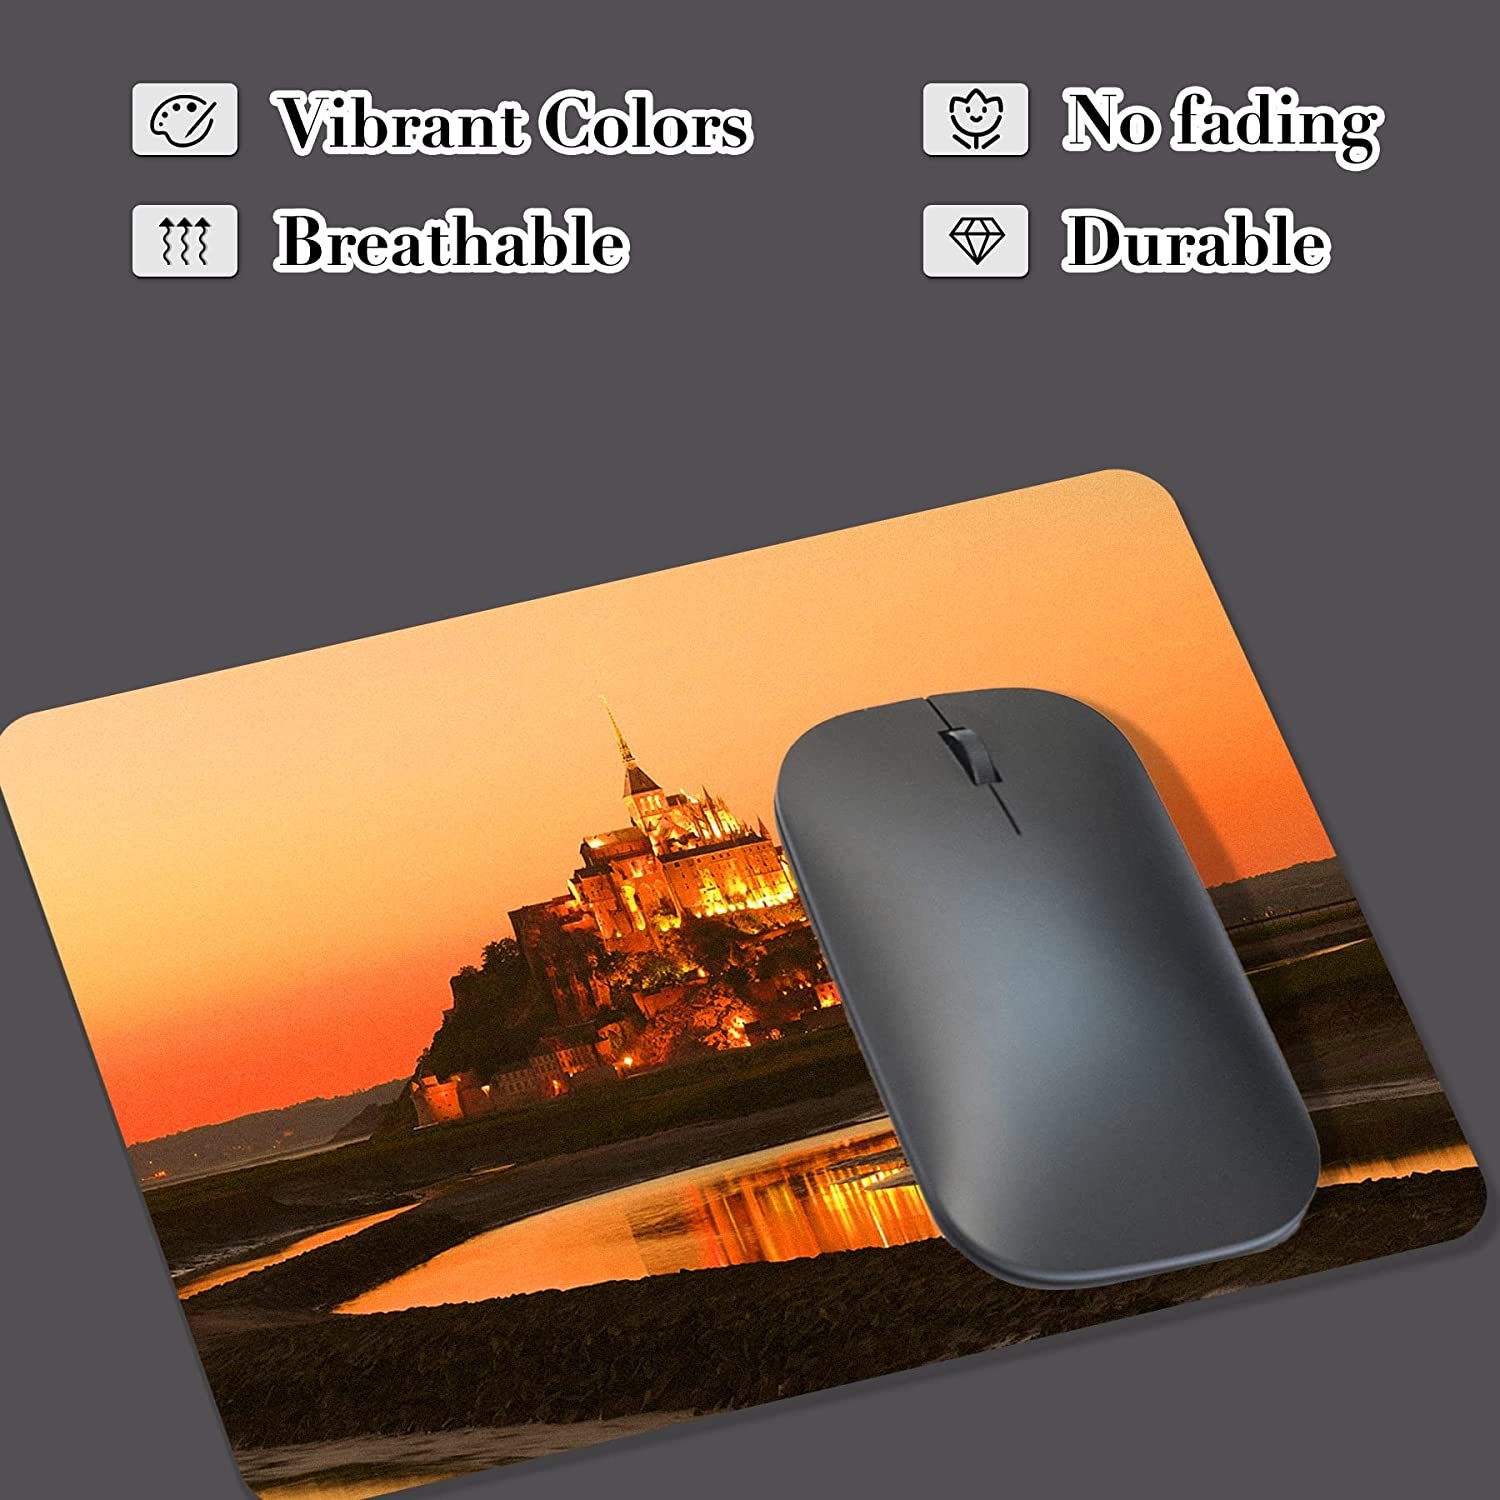 A-SUB Sublimation Mouse Pad Blank Rectangular Blanks 3mm Thick for Transfer Heat Press Printing Crafts 9.4x7.9x0.12 Inches White 11pc